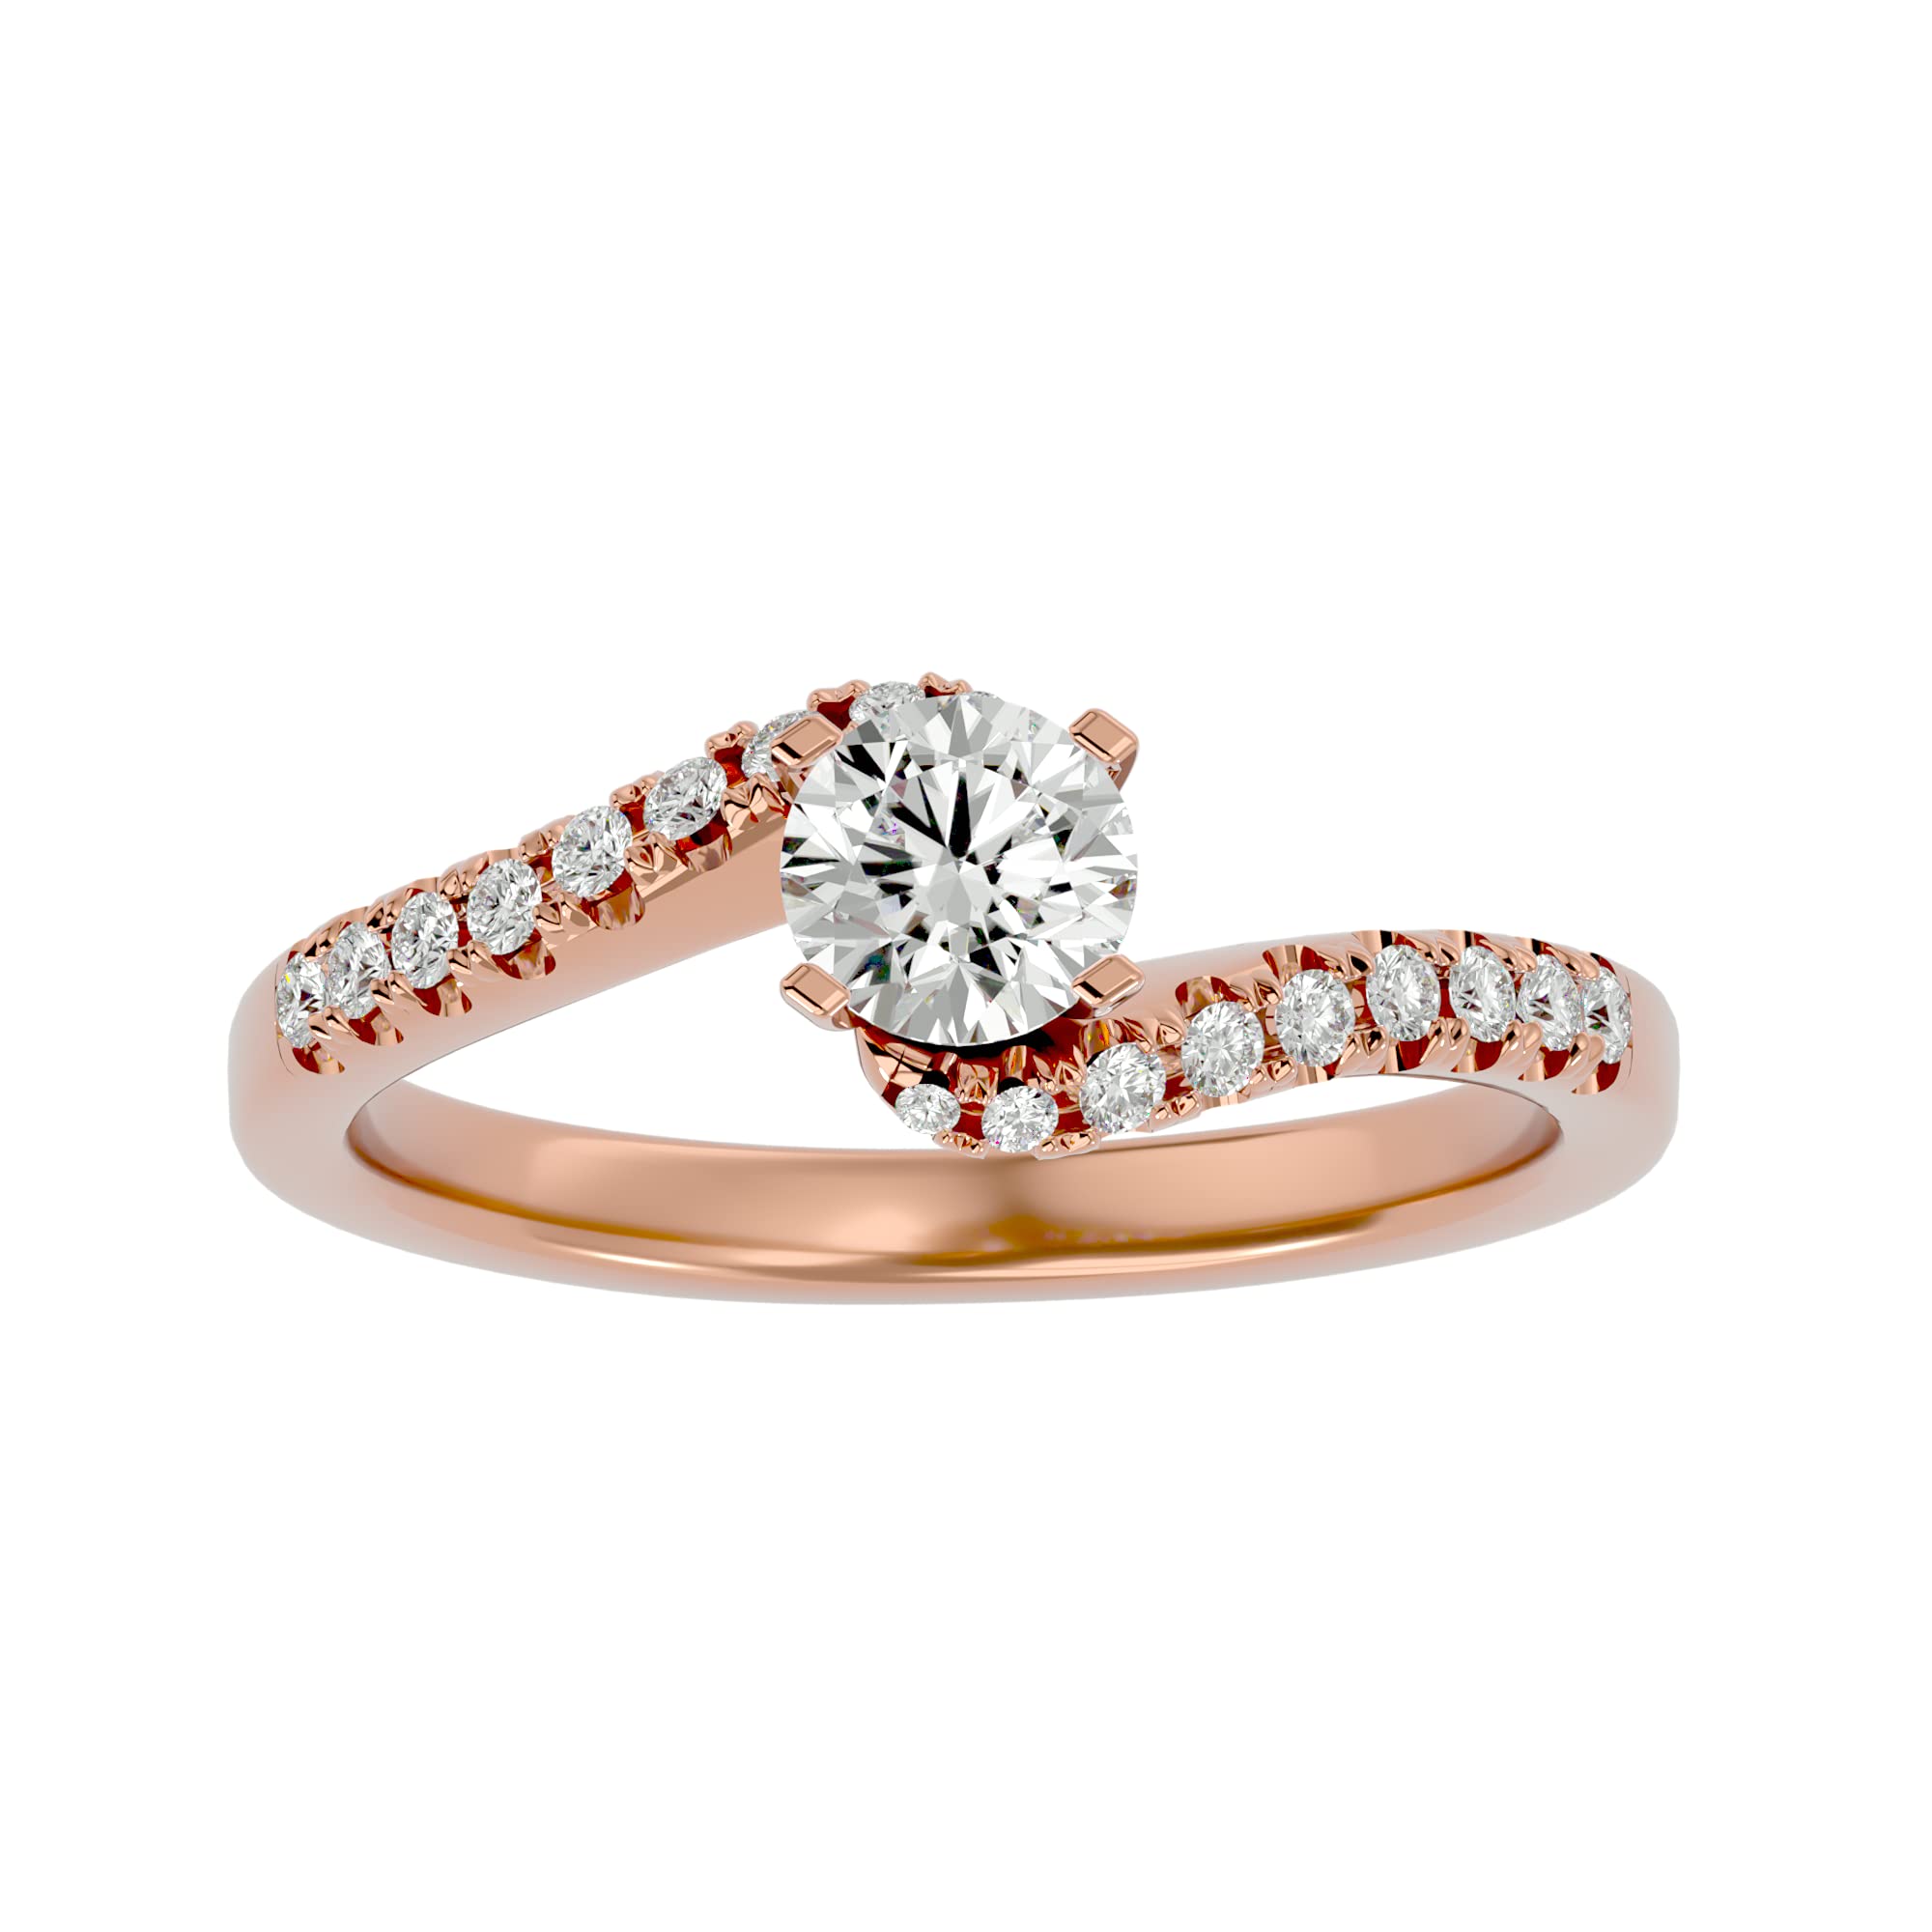 Certified 18K Gold Ring in Round Cut Moissanite Diamond (0.51 ct) Round Cut Natural Diamond (0.16 ct) With White/Yellow/Rose Gold Engagement Ring For Women